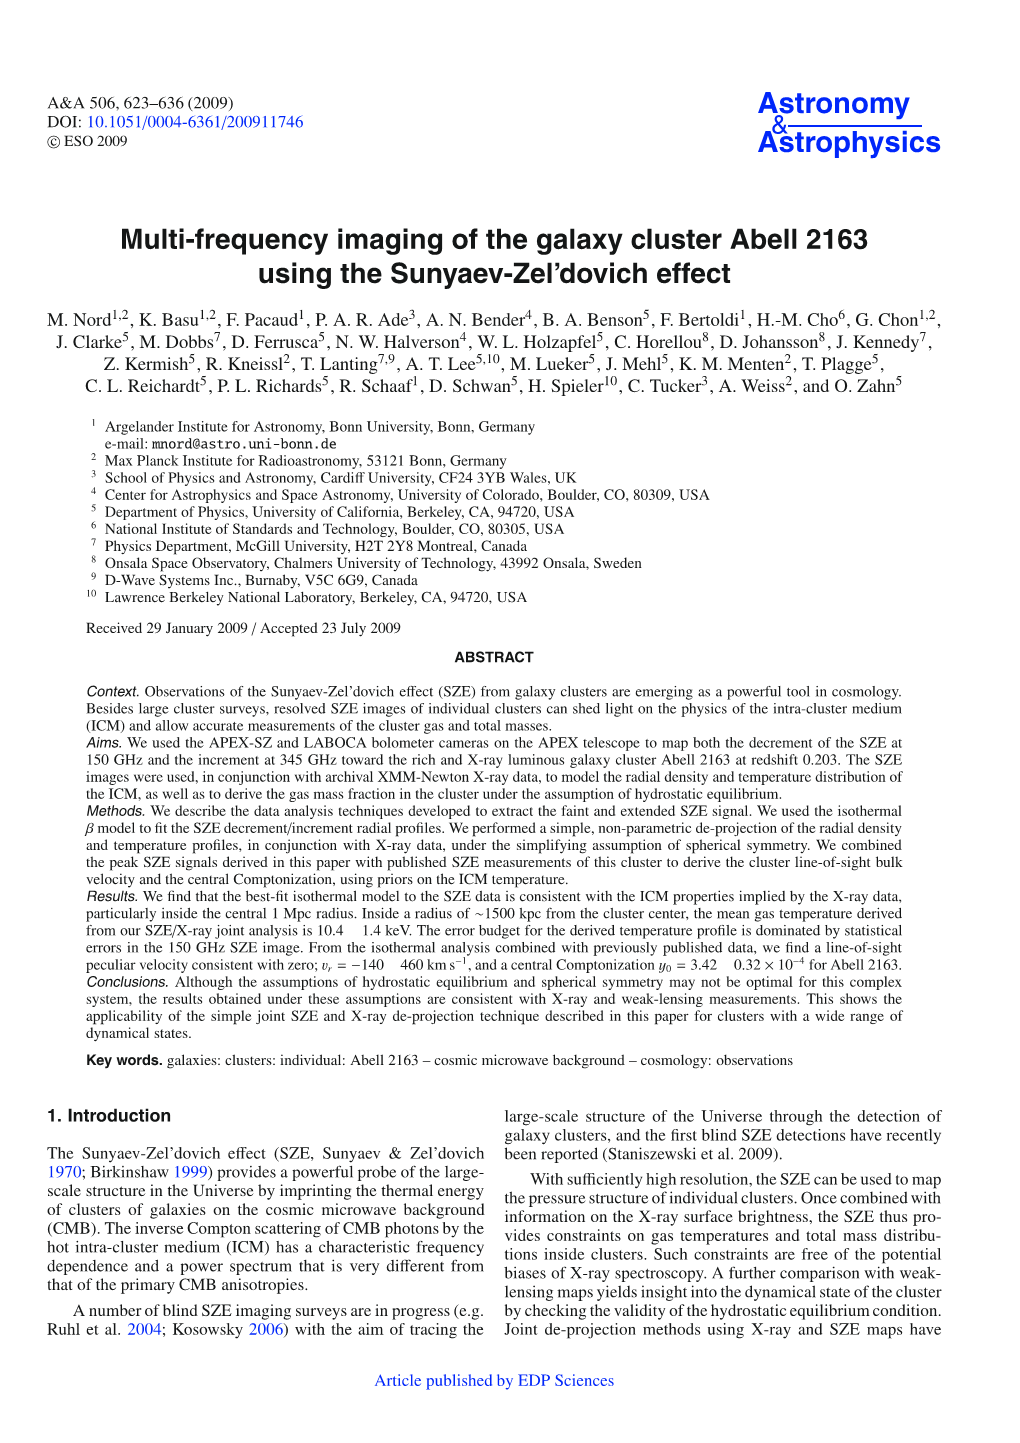 Multi-Frequency Imaging of the Galaxy Cluster Abell 2163 Using the Sunyaev-Zel’Dovich Effect